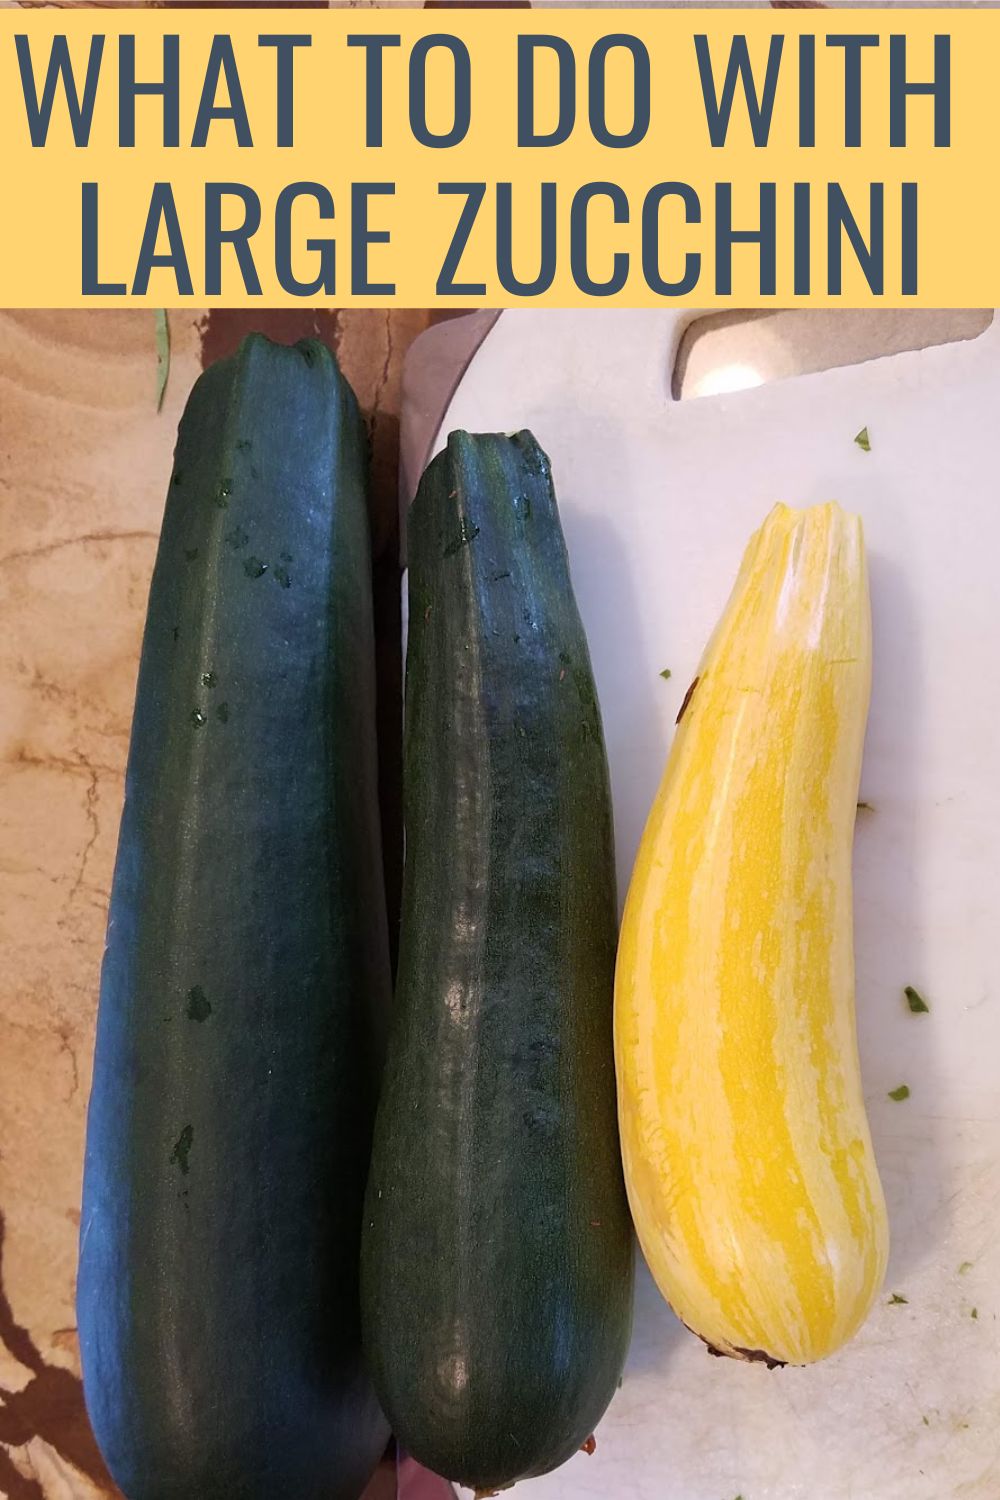 What to do with large zucchini